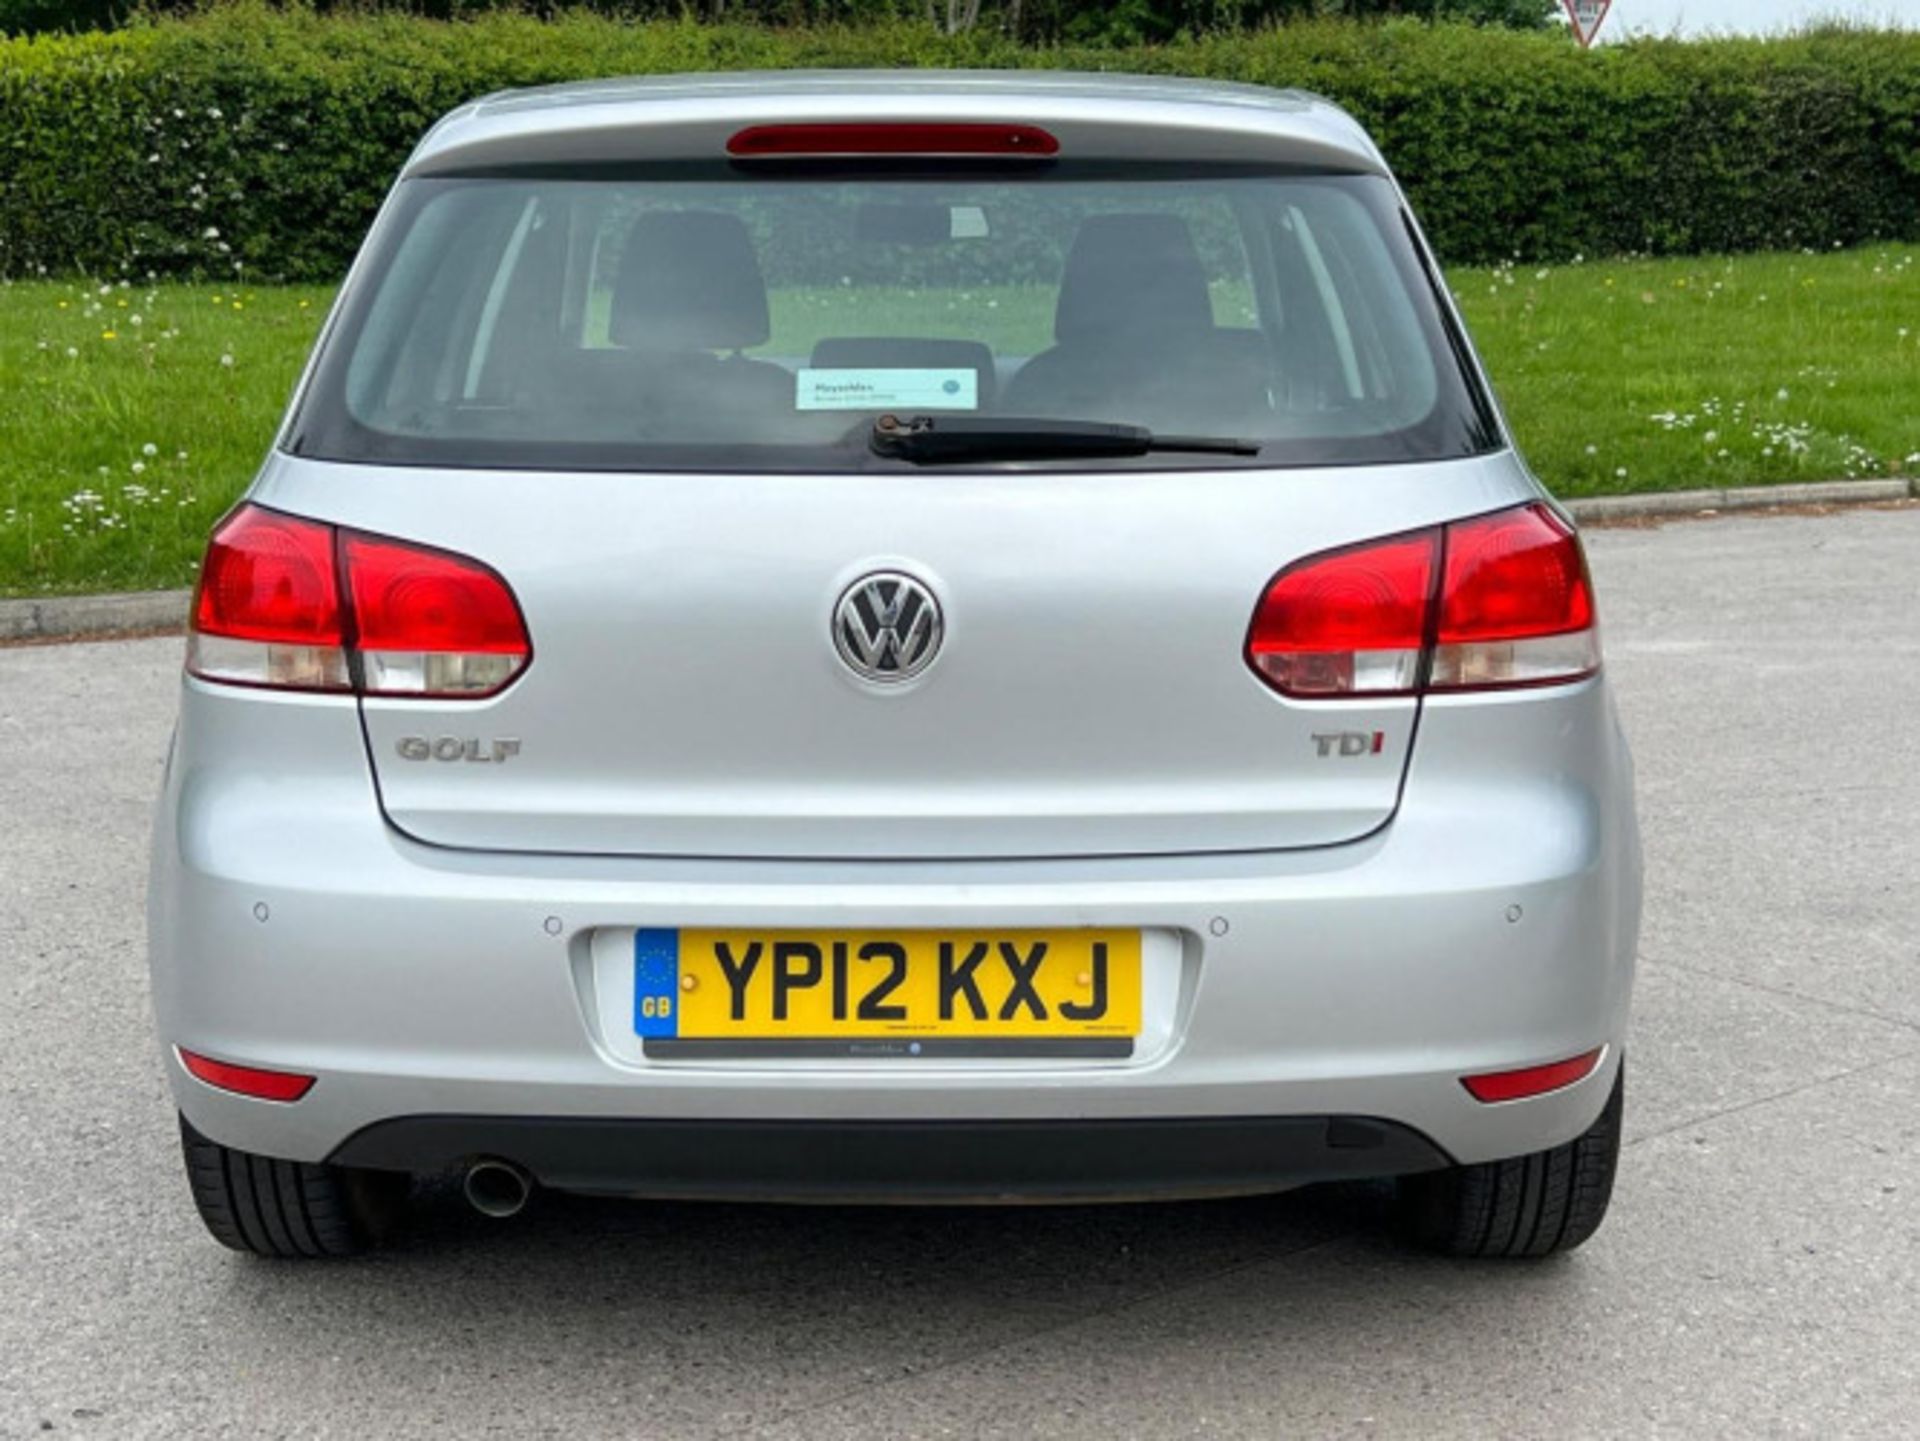 IMPECCABLE 2012 VOLKSWAGEN GOLF 1.6 TDI MATCH >>--NO VAT ON HAMMER--<< - Image 7 of 116